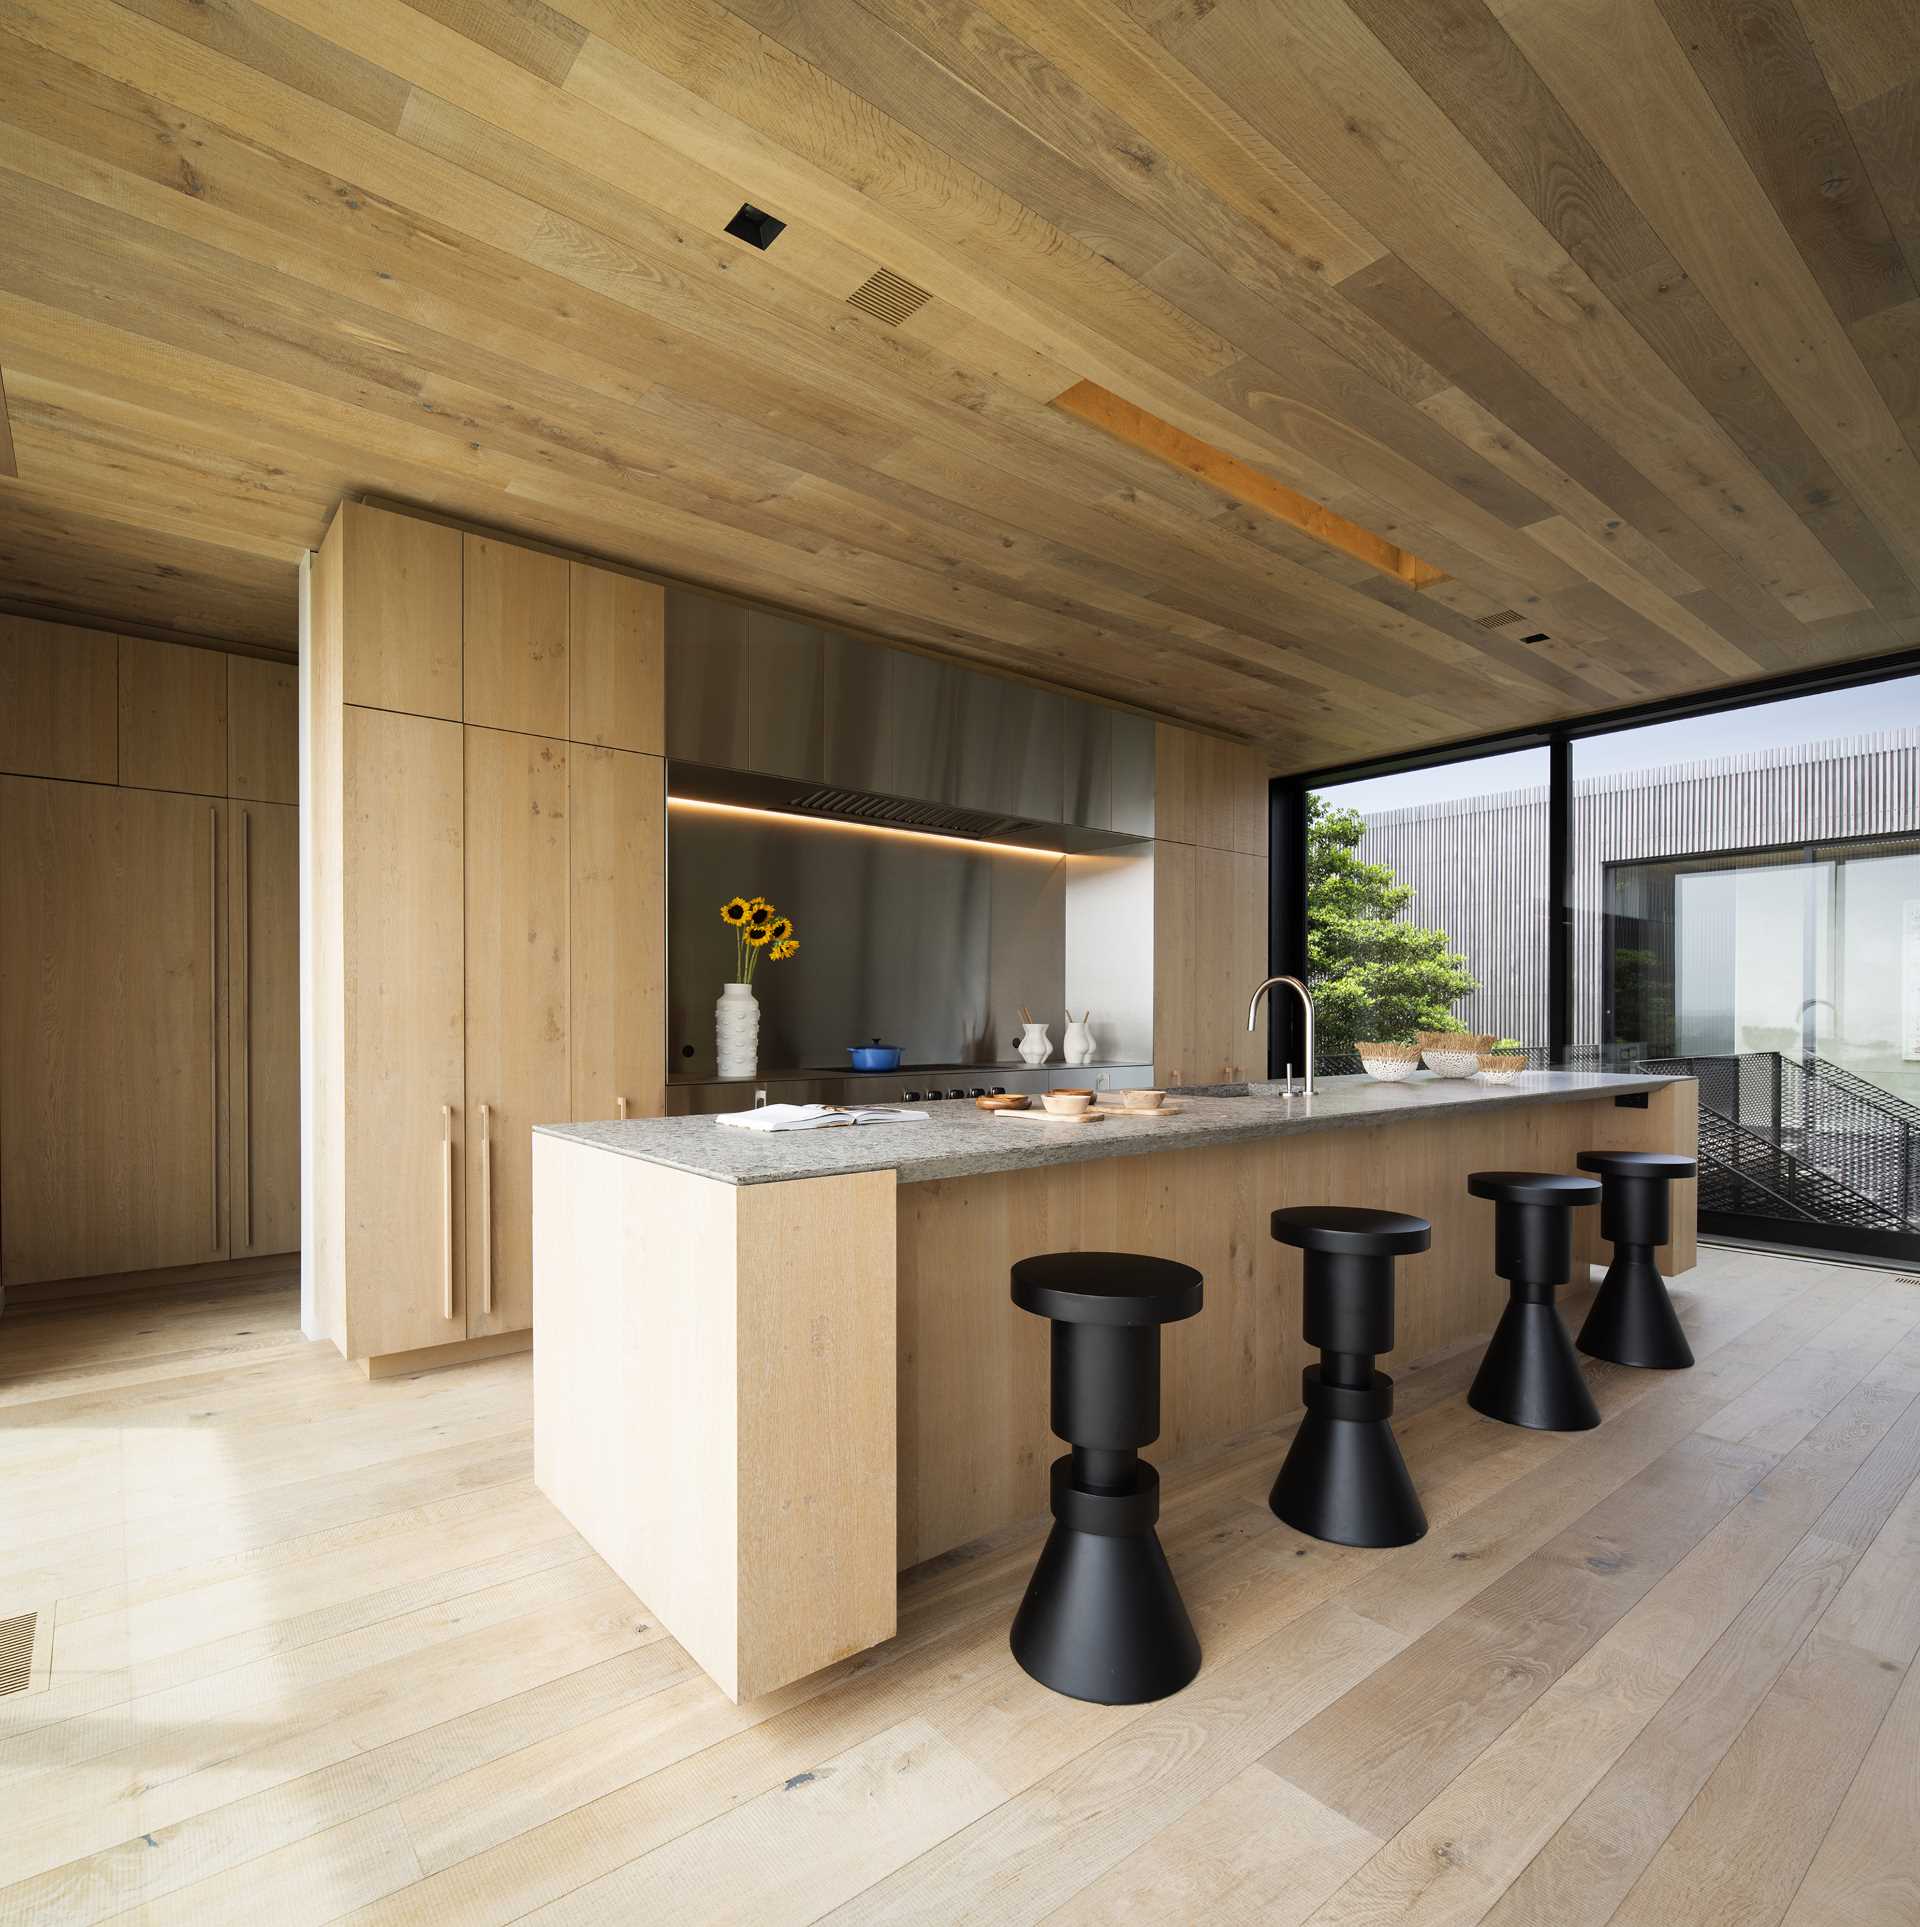 This wood kitchen, which has a large island, also includes a butler's pantry that's tucked away out of view.